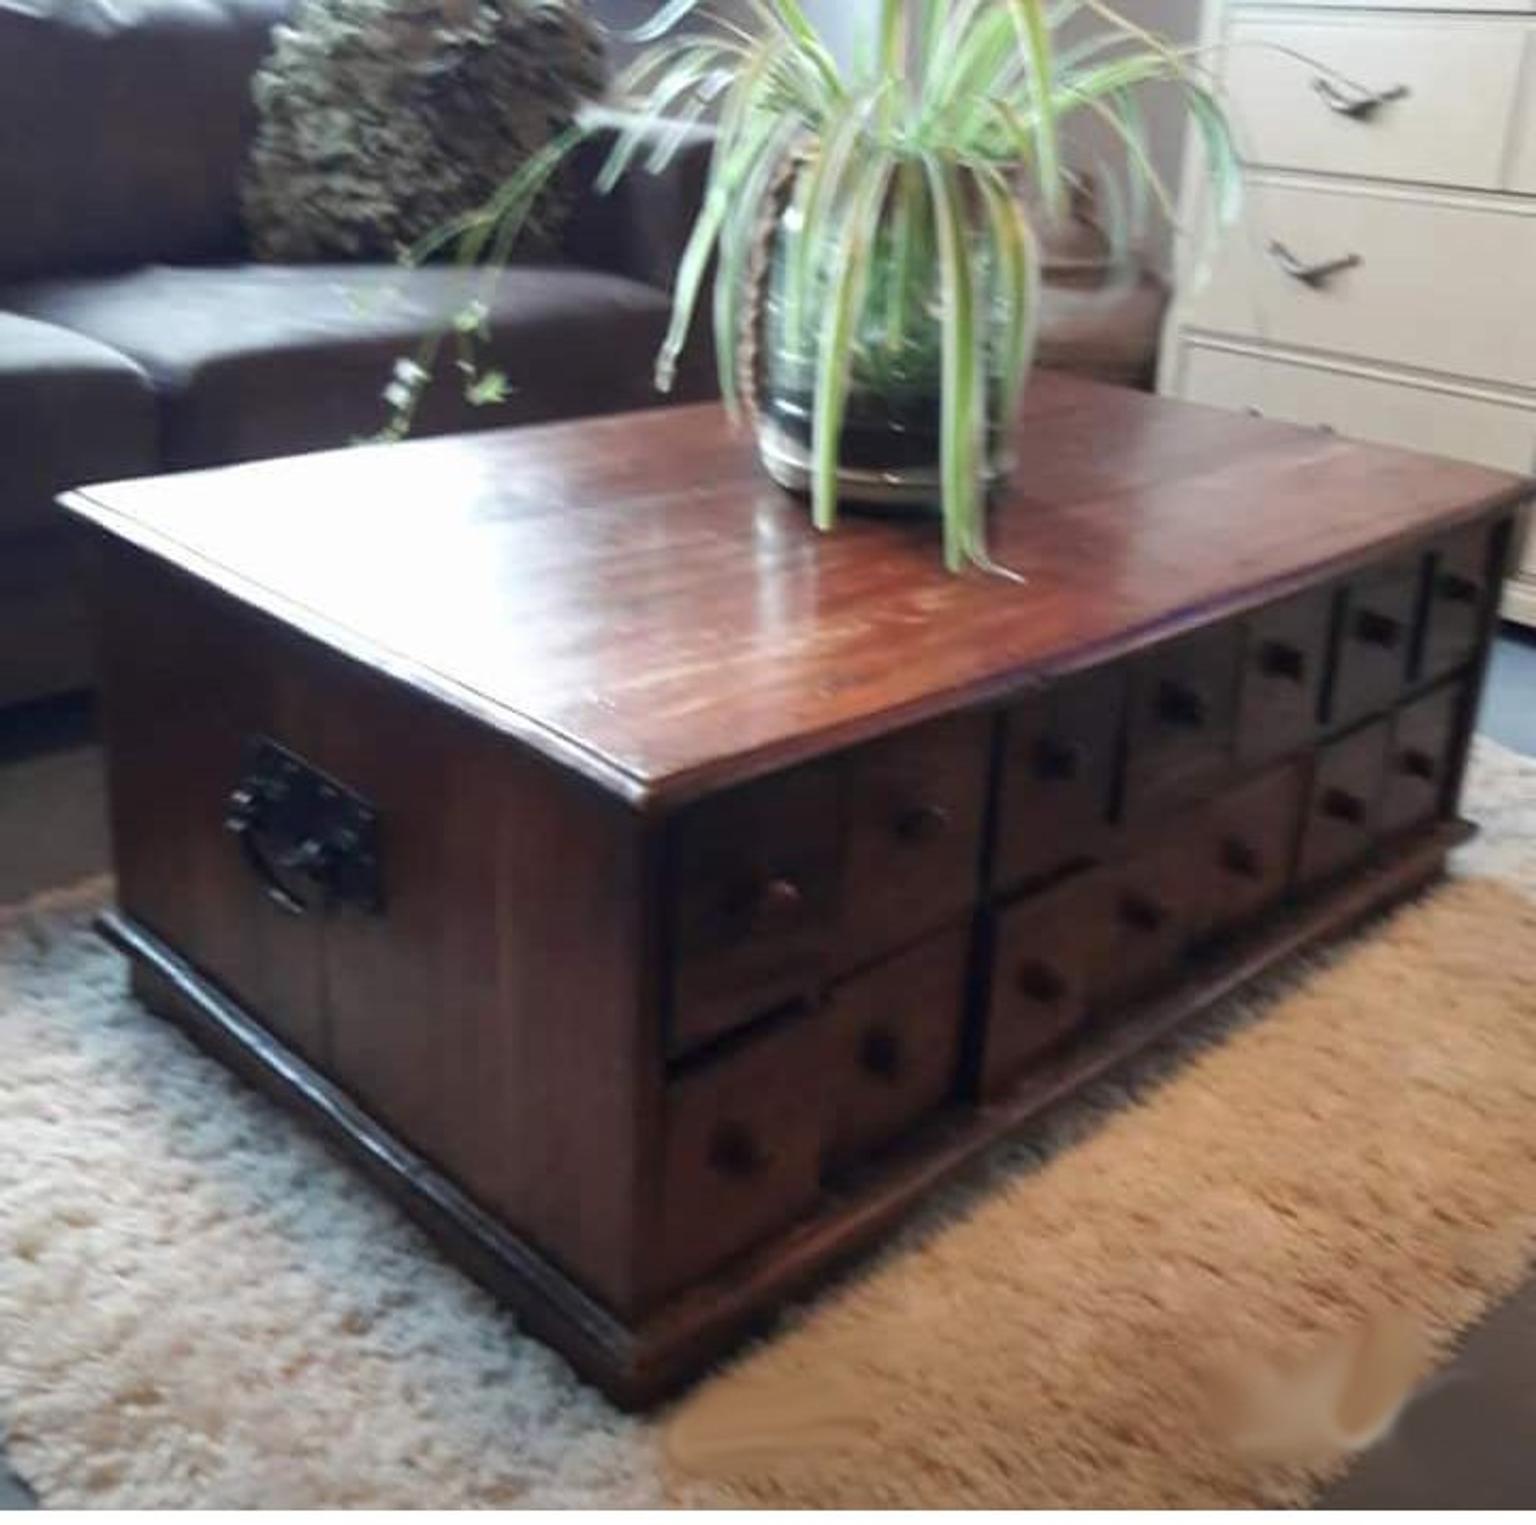 Coffee Table Antique Style Solid Dark Wood In Tn15 Sevenoaks For 75 00 For Sale Shpock